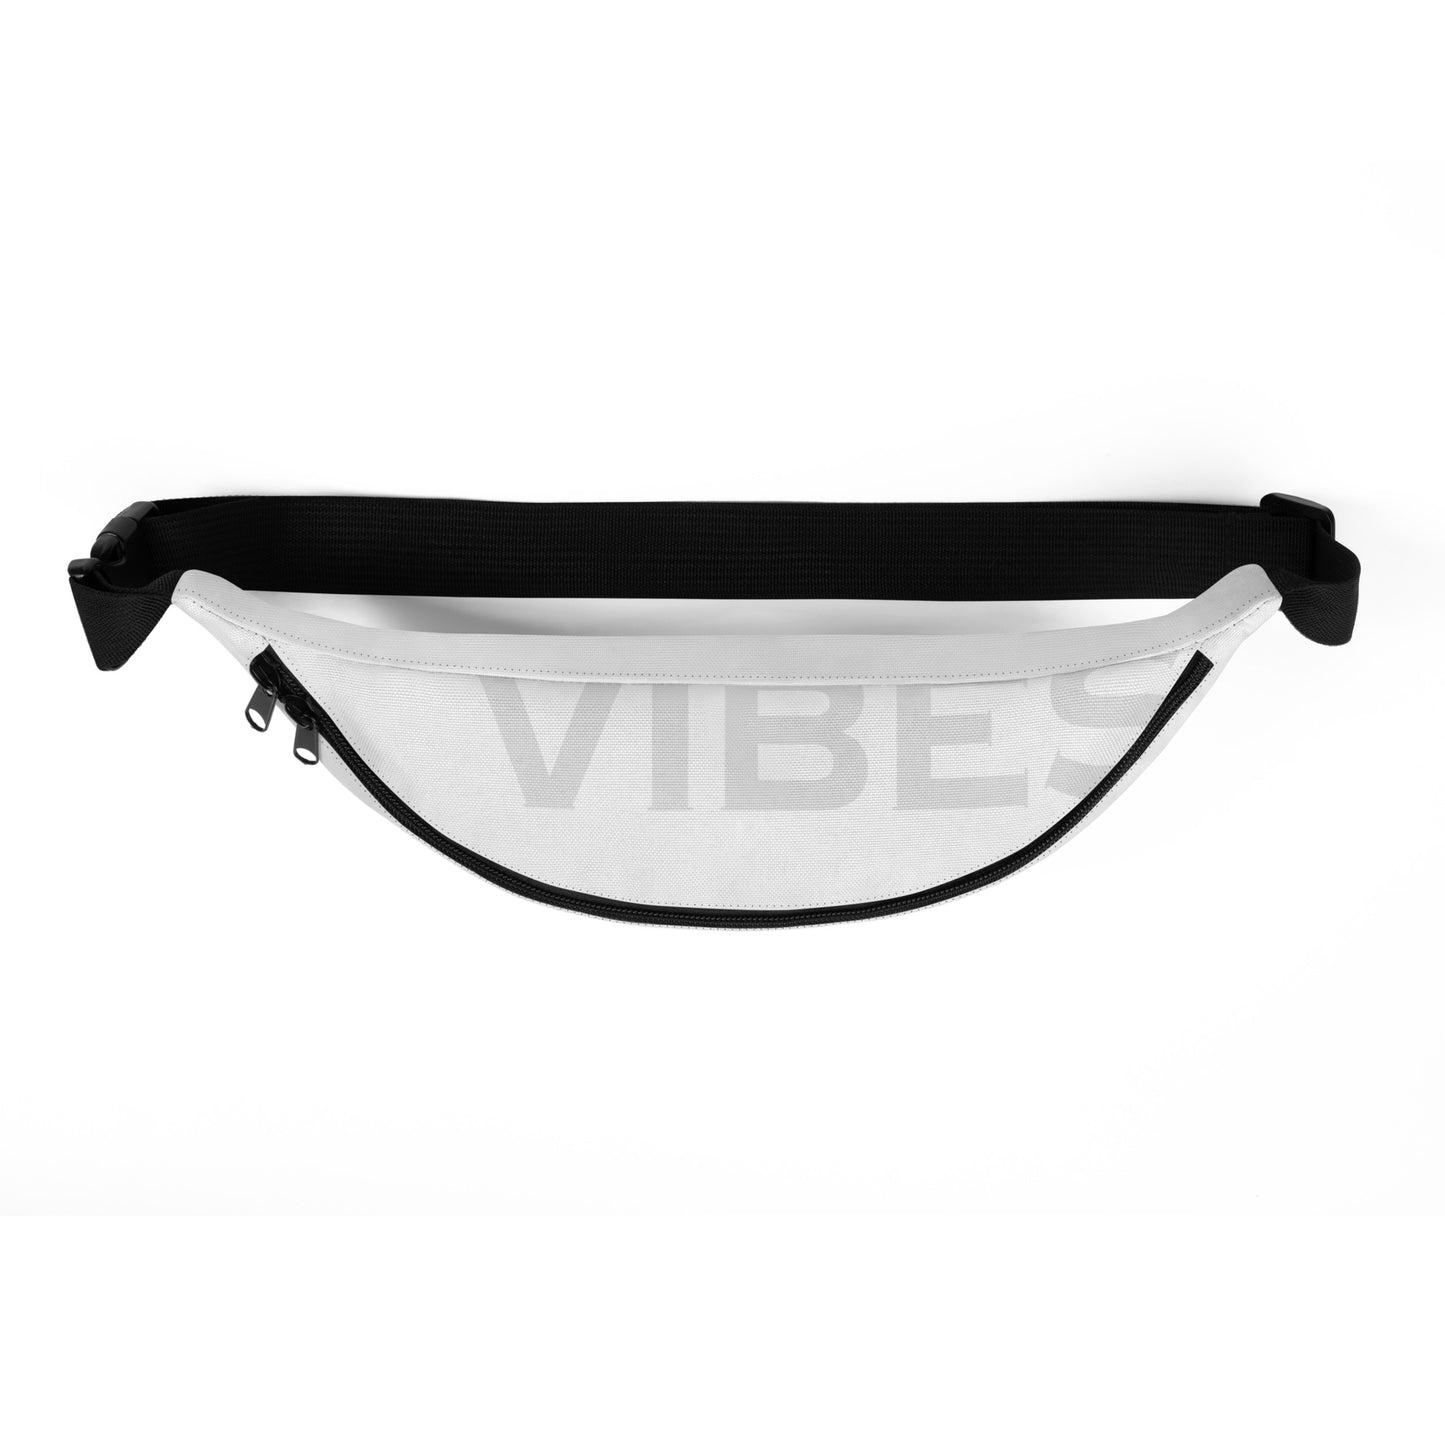 TIME OF VIBES - Fanny Pack VIBES (White/Lightgrey) - €39.00